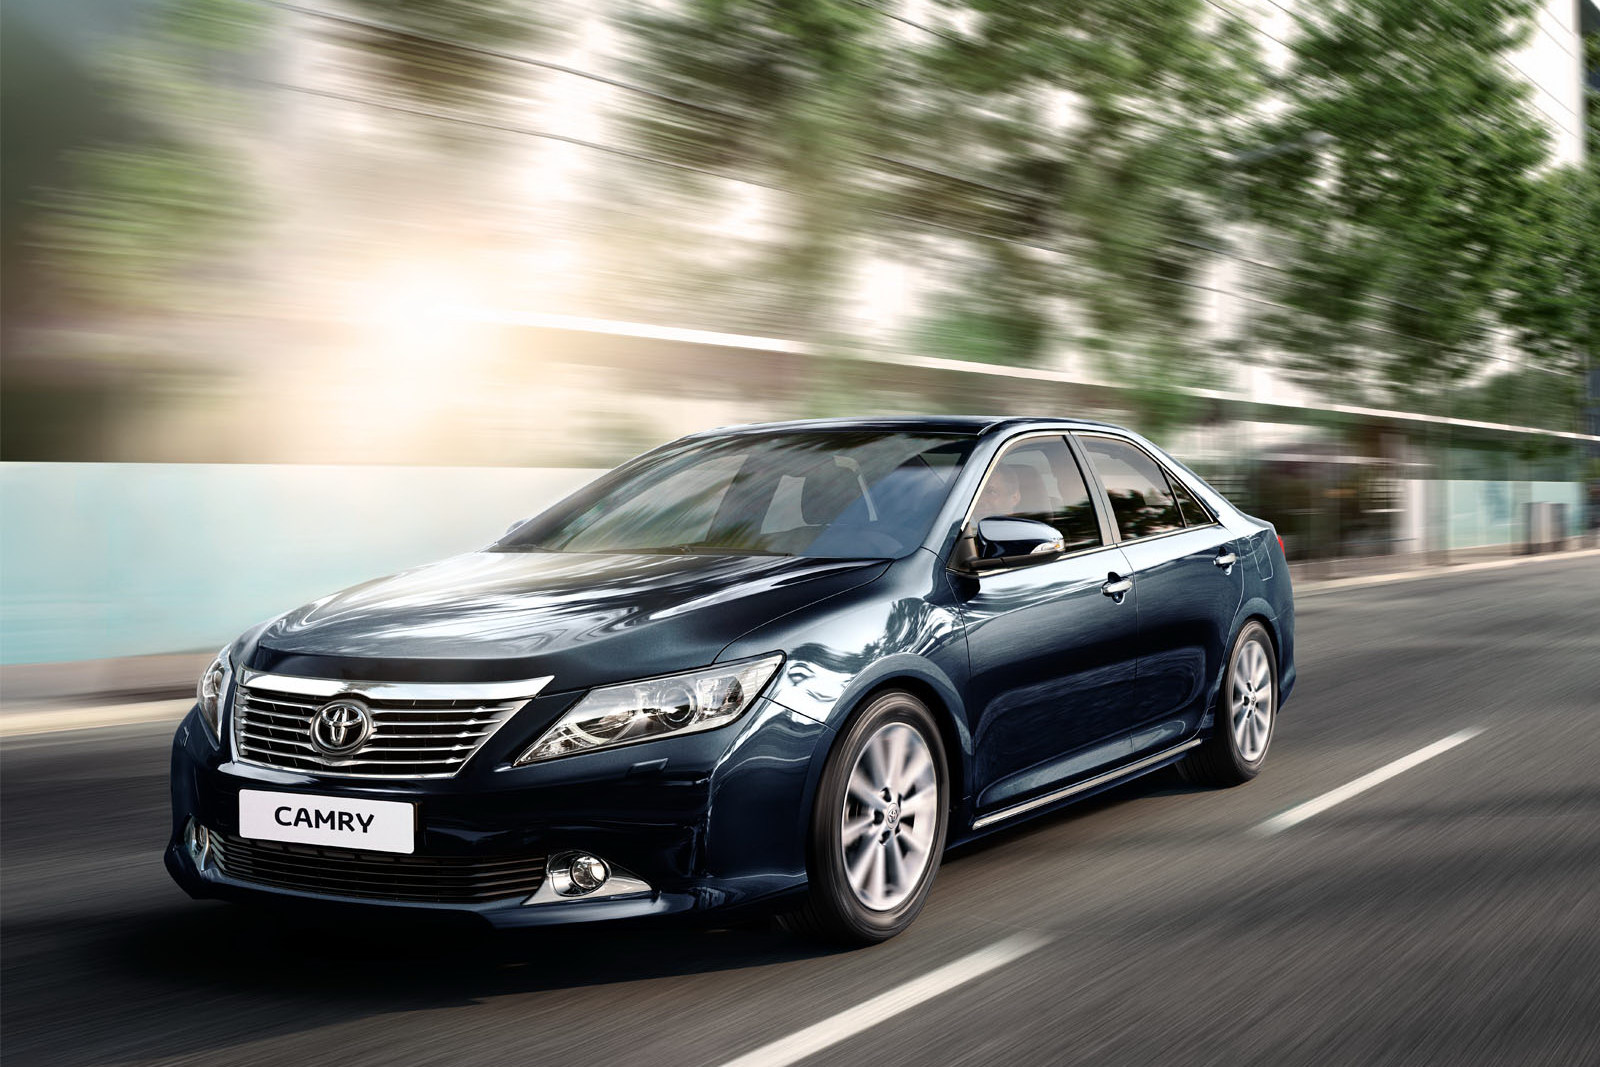 2012 Toyota Camry Production Begins in Russia - autoevolution